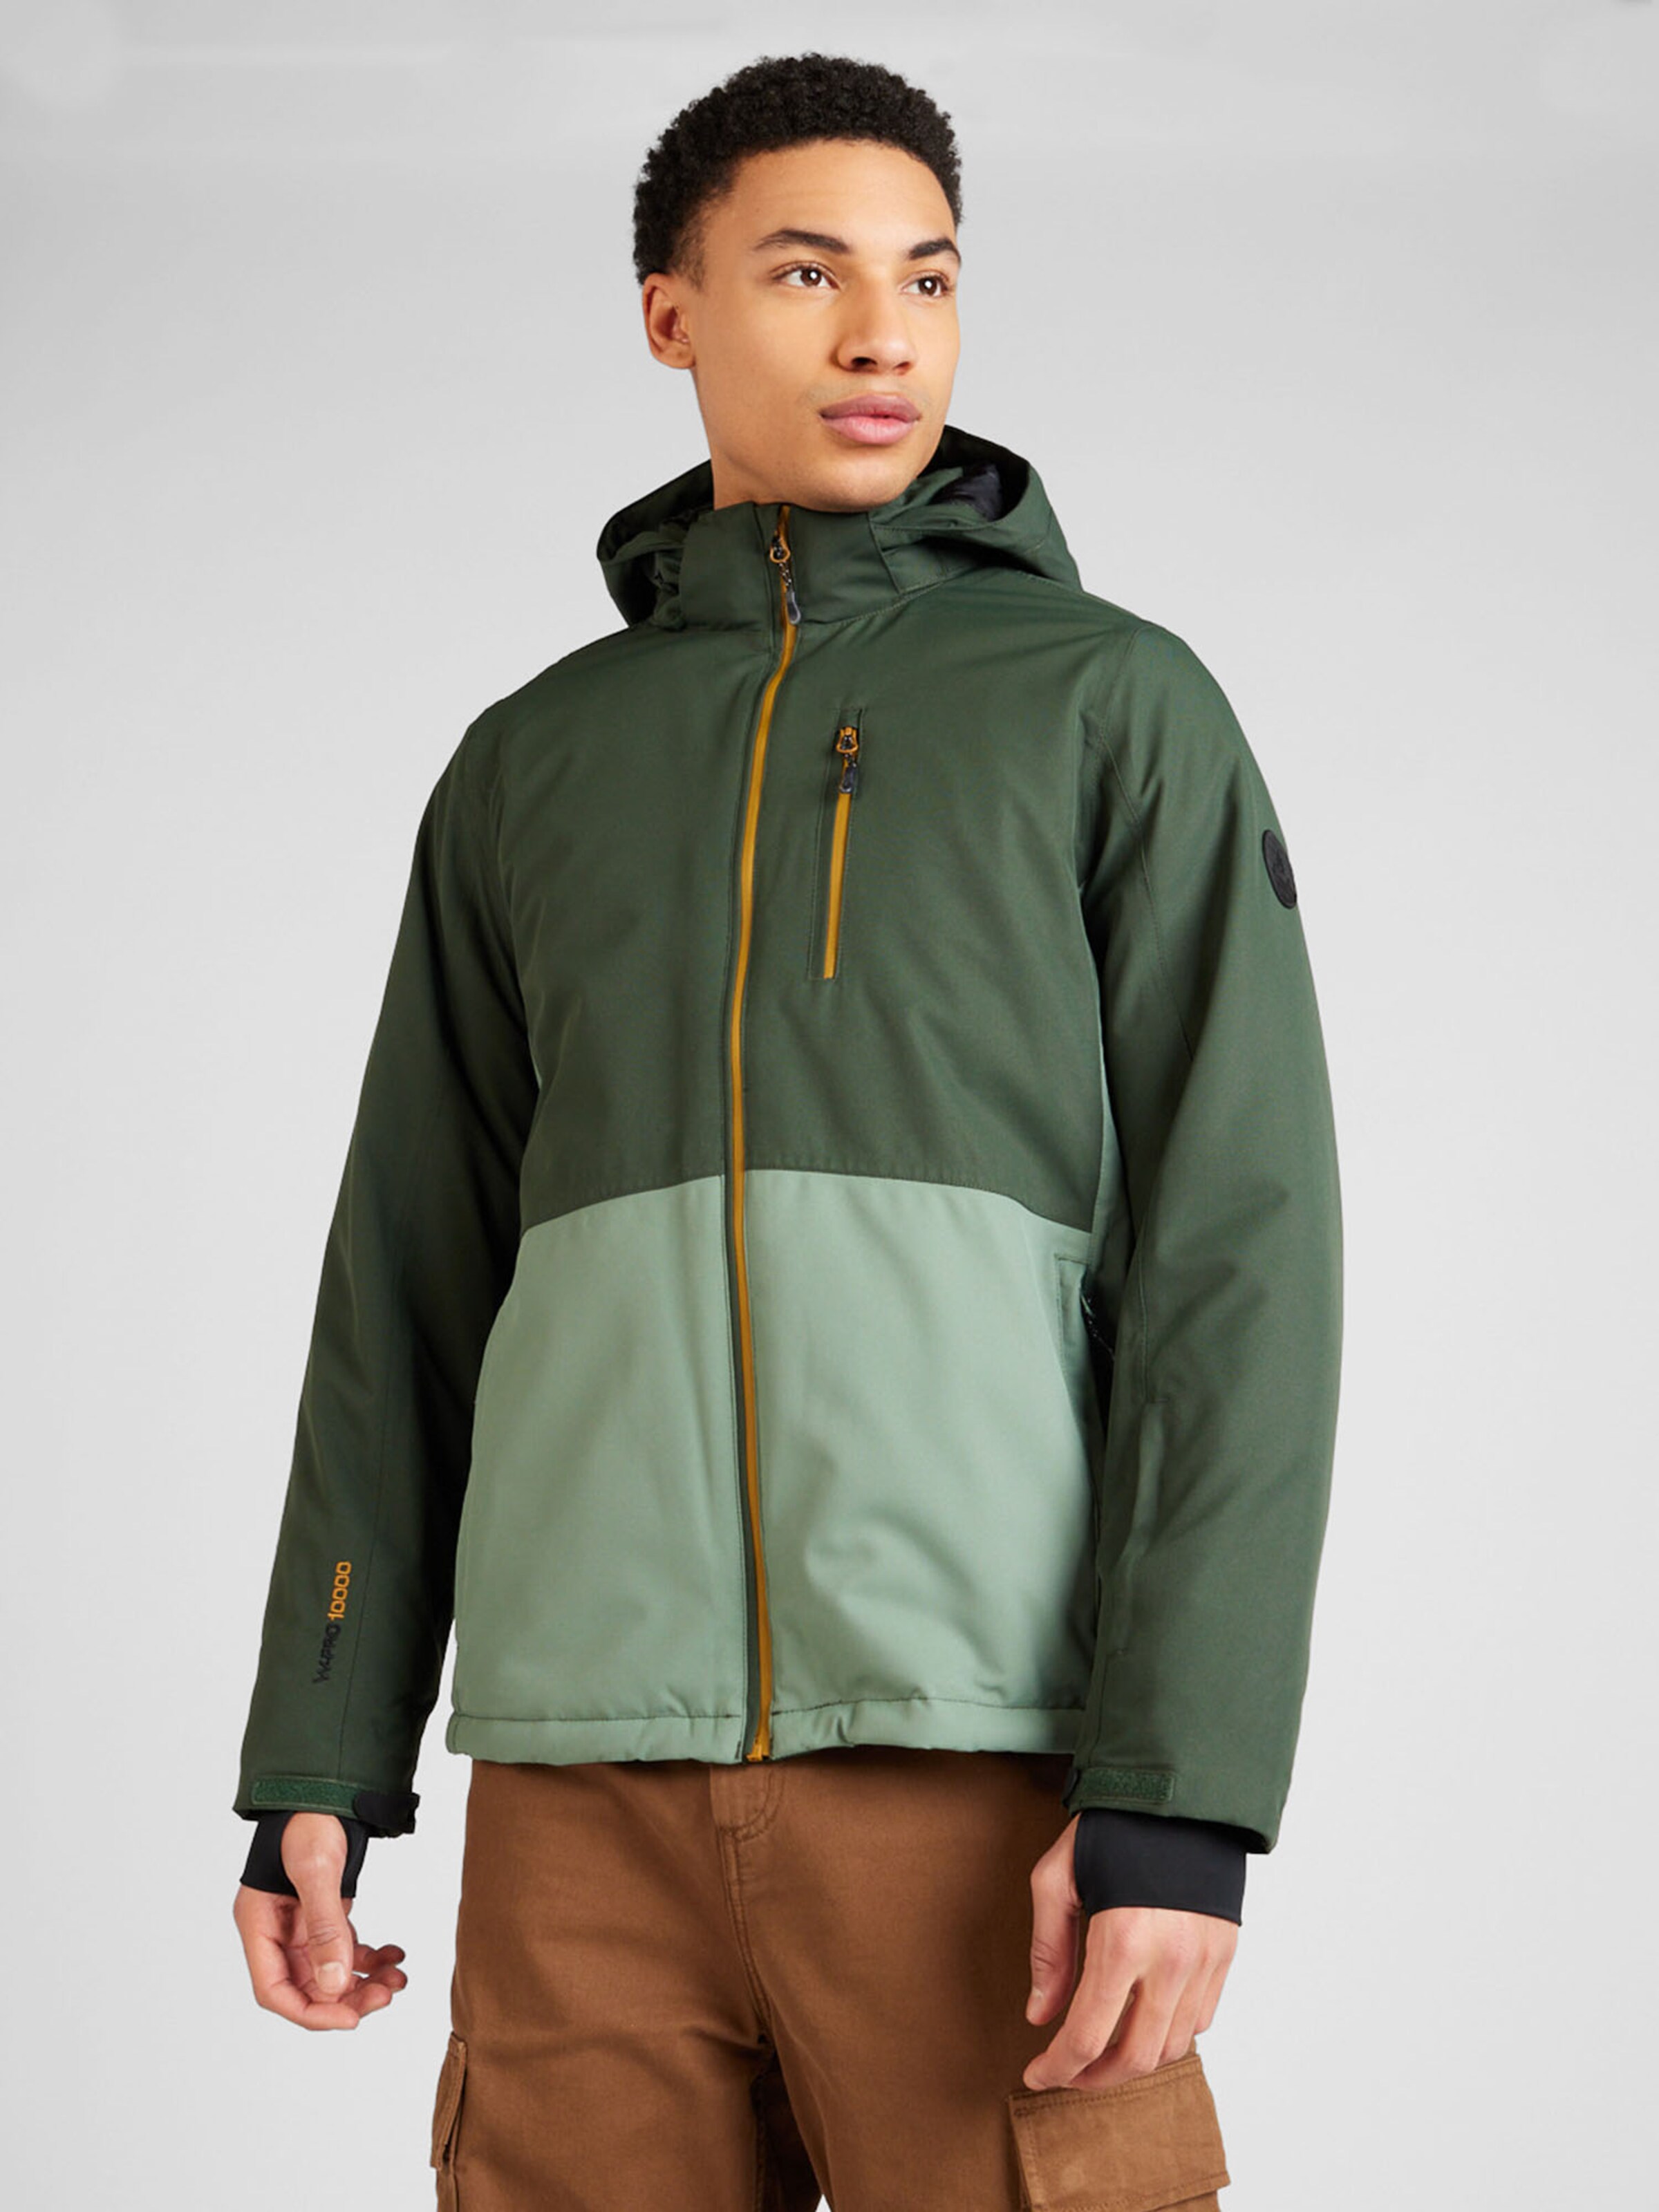 Whistler Skijacke 'Drizzle' in Khaki, Oliv | ABOUT YOU